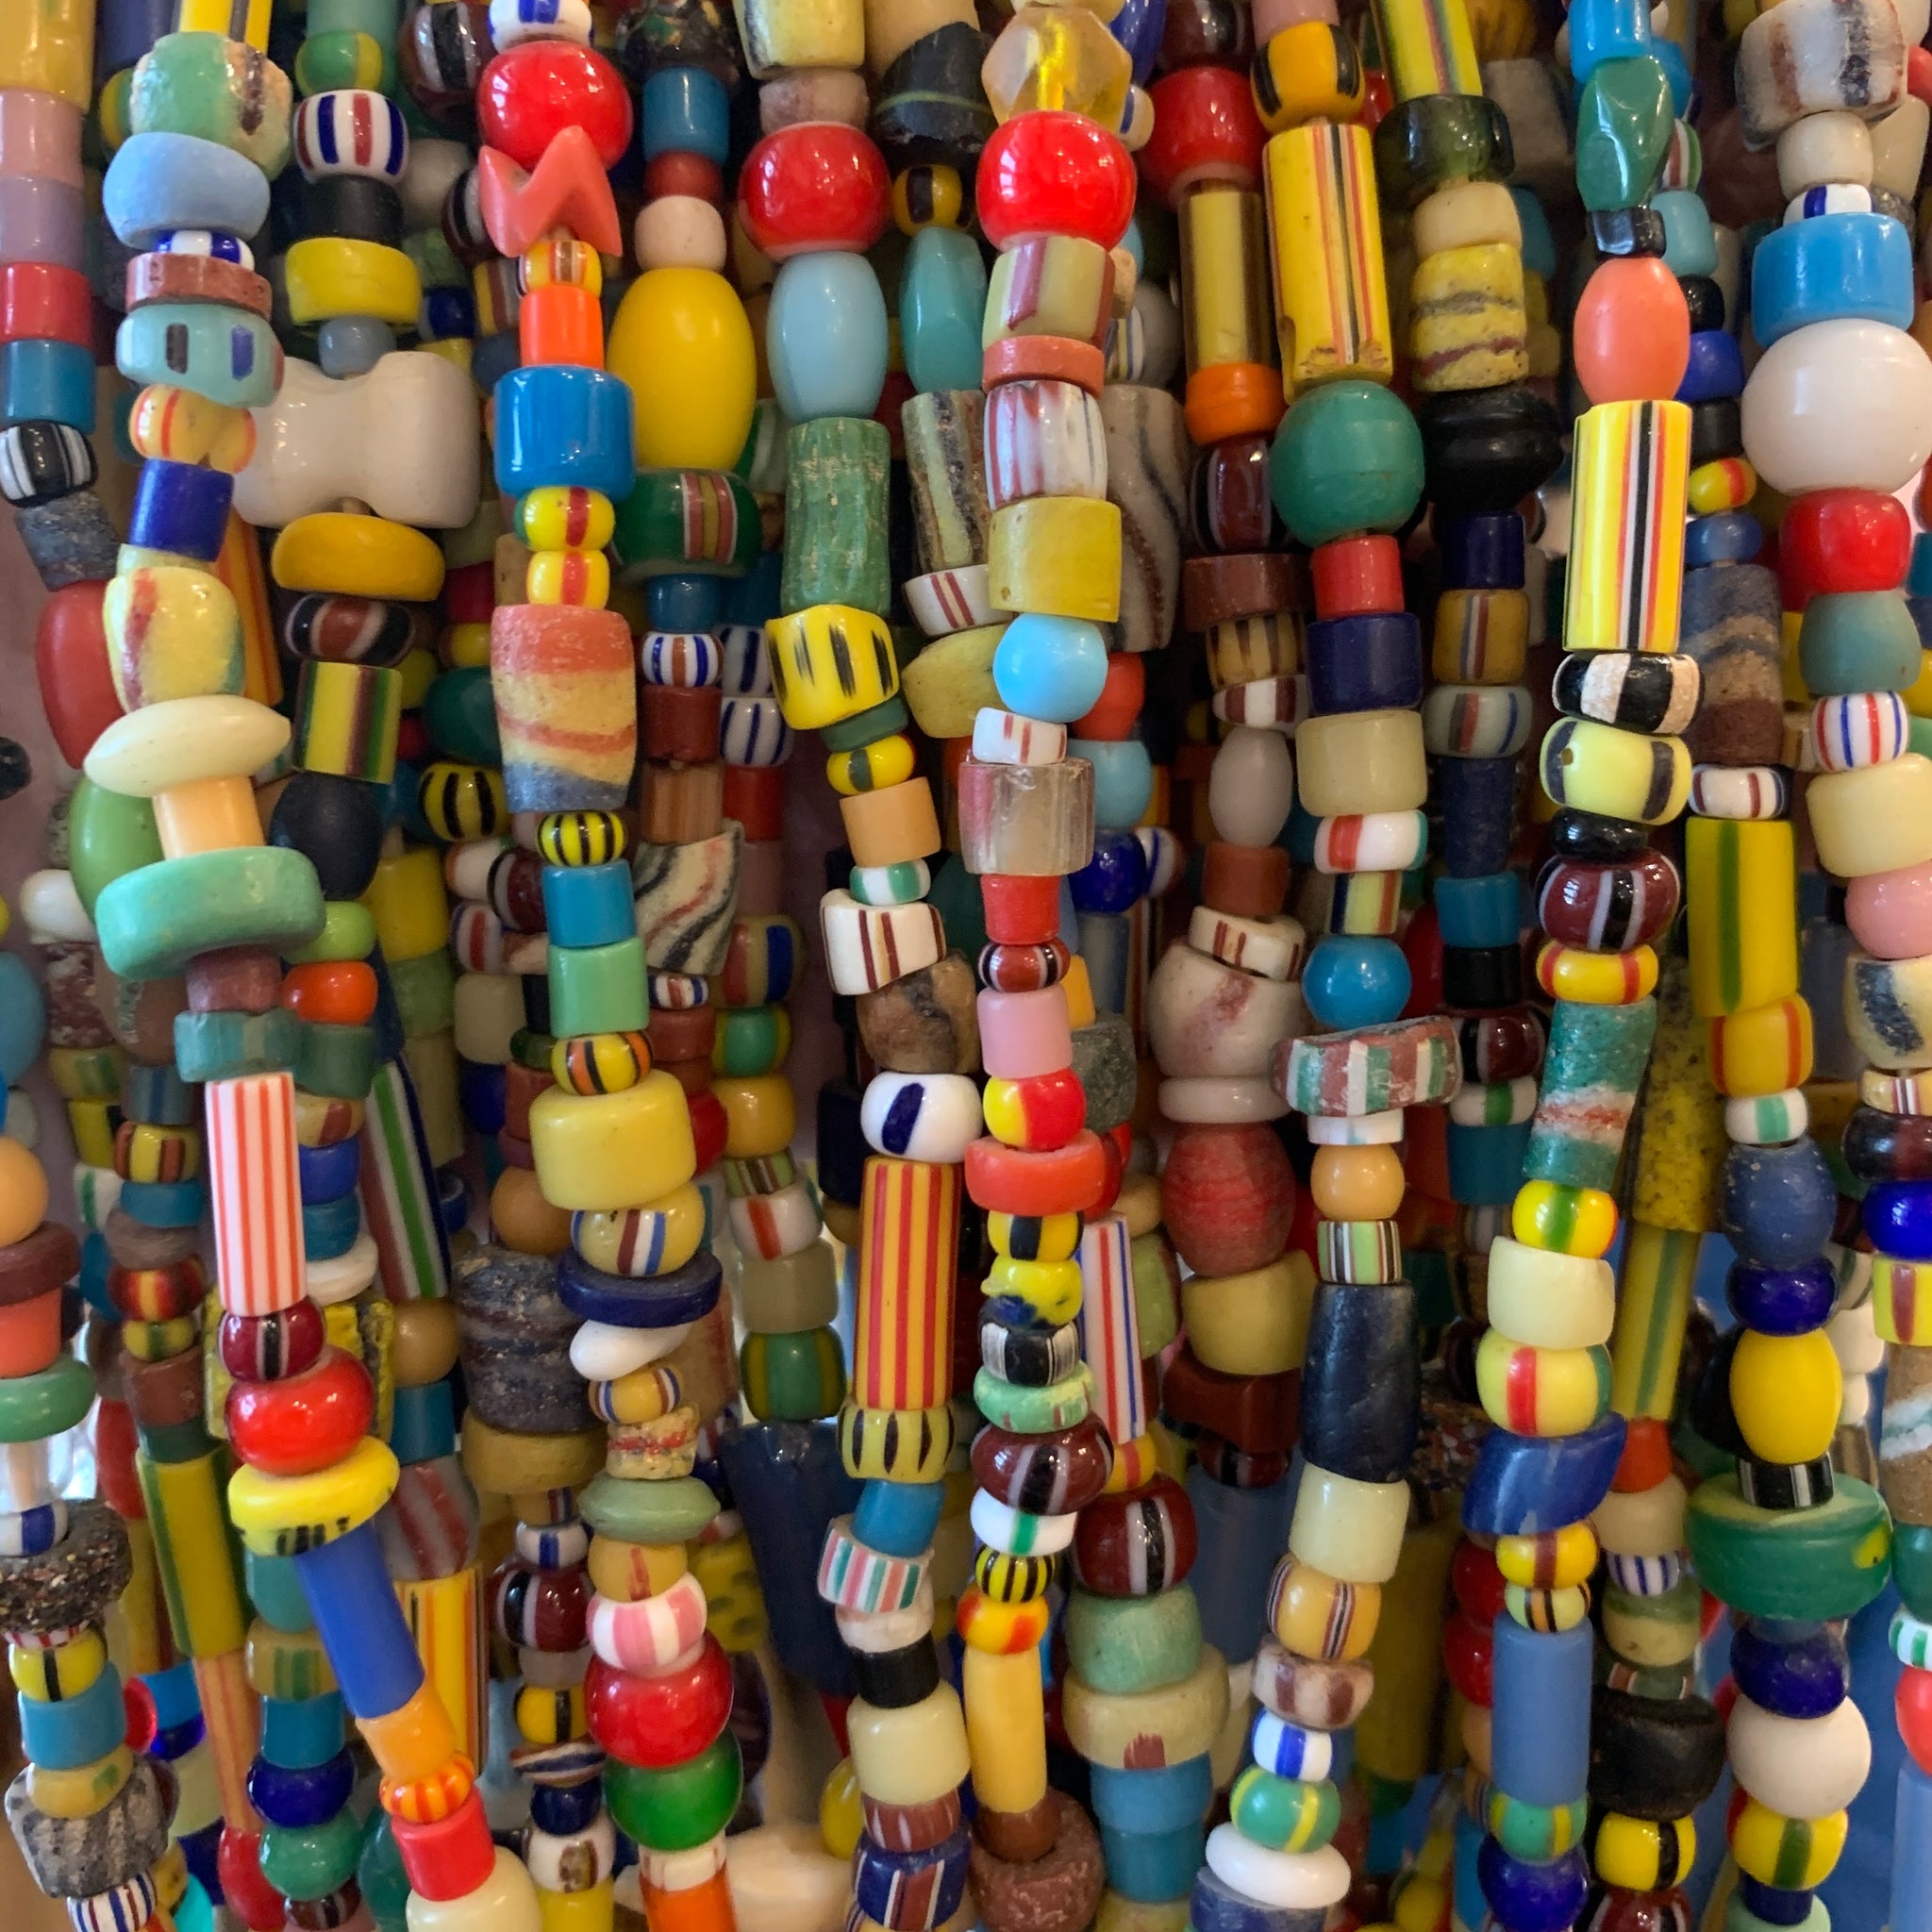 Strands Antique African Christmas Mixed Beads African Trade Beads-Ghana  [3061] 